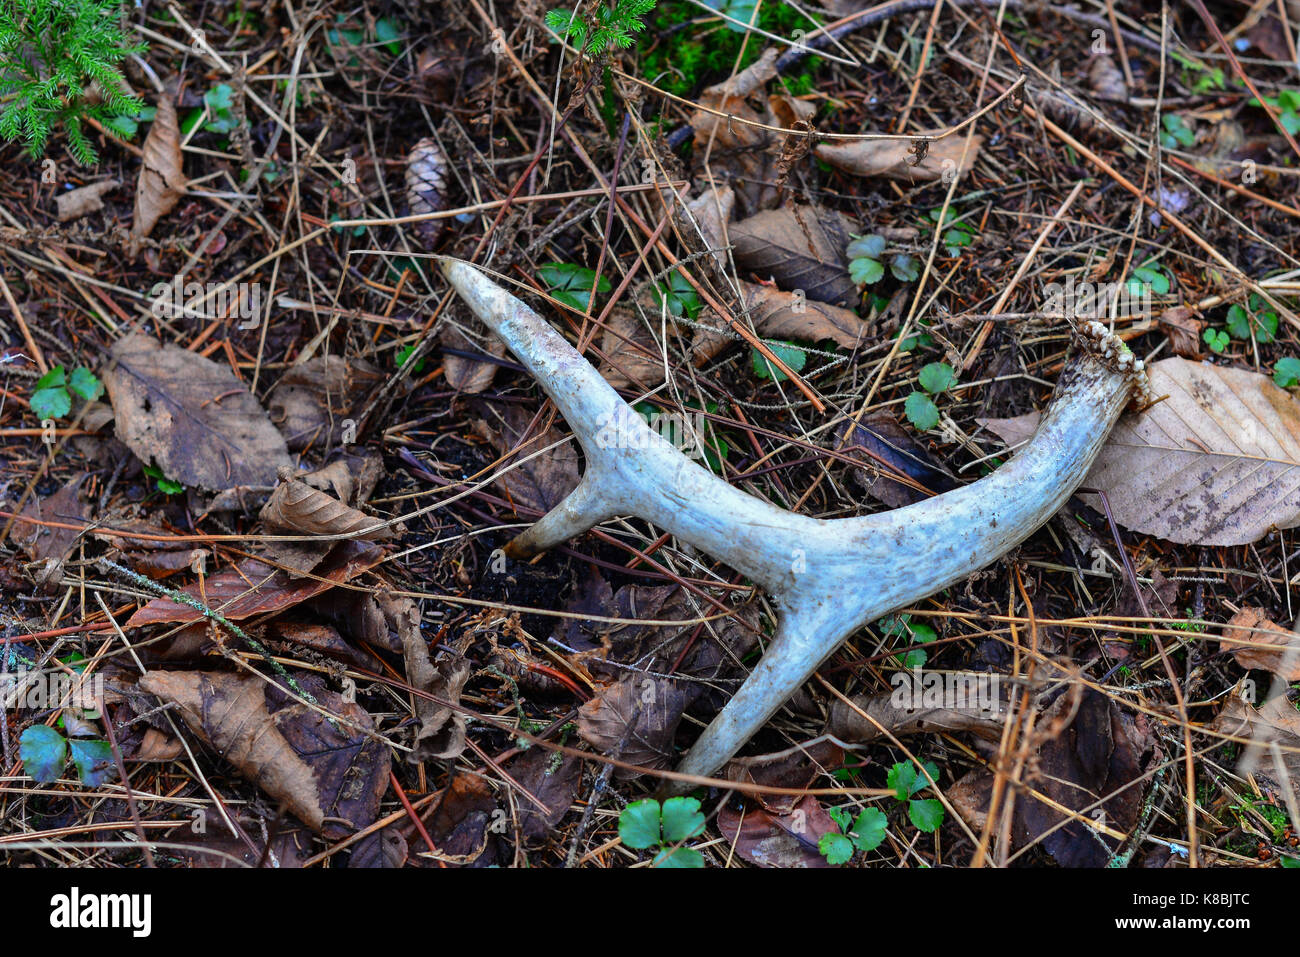 Shed whitetail deer antler resting on the forest floor, showing marks where mice have chewed on it. Stock Photo